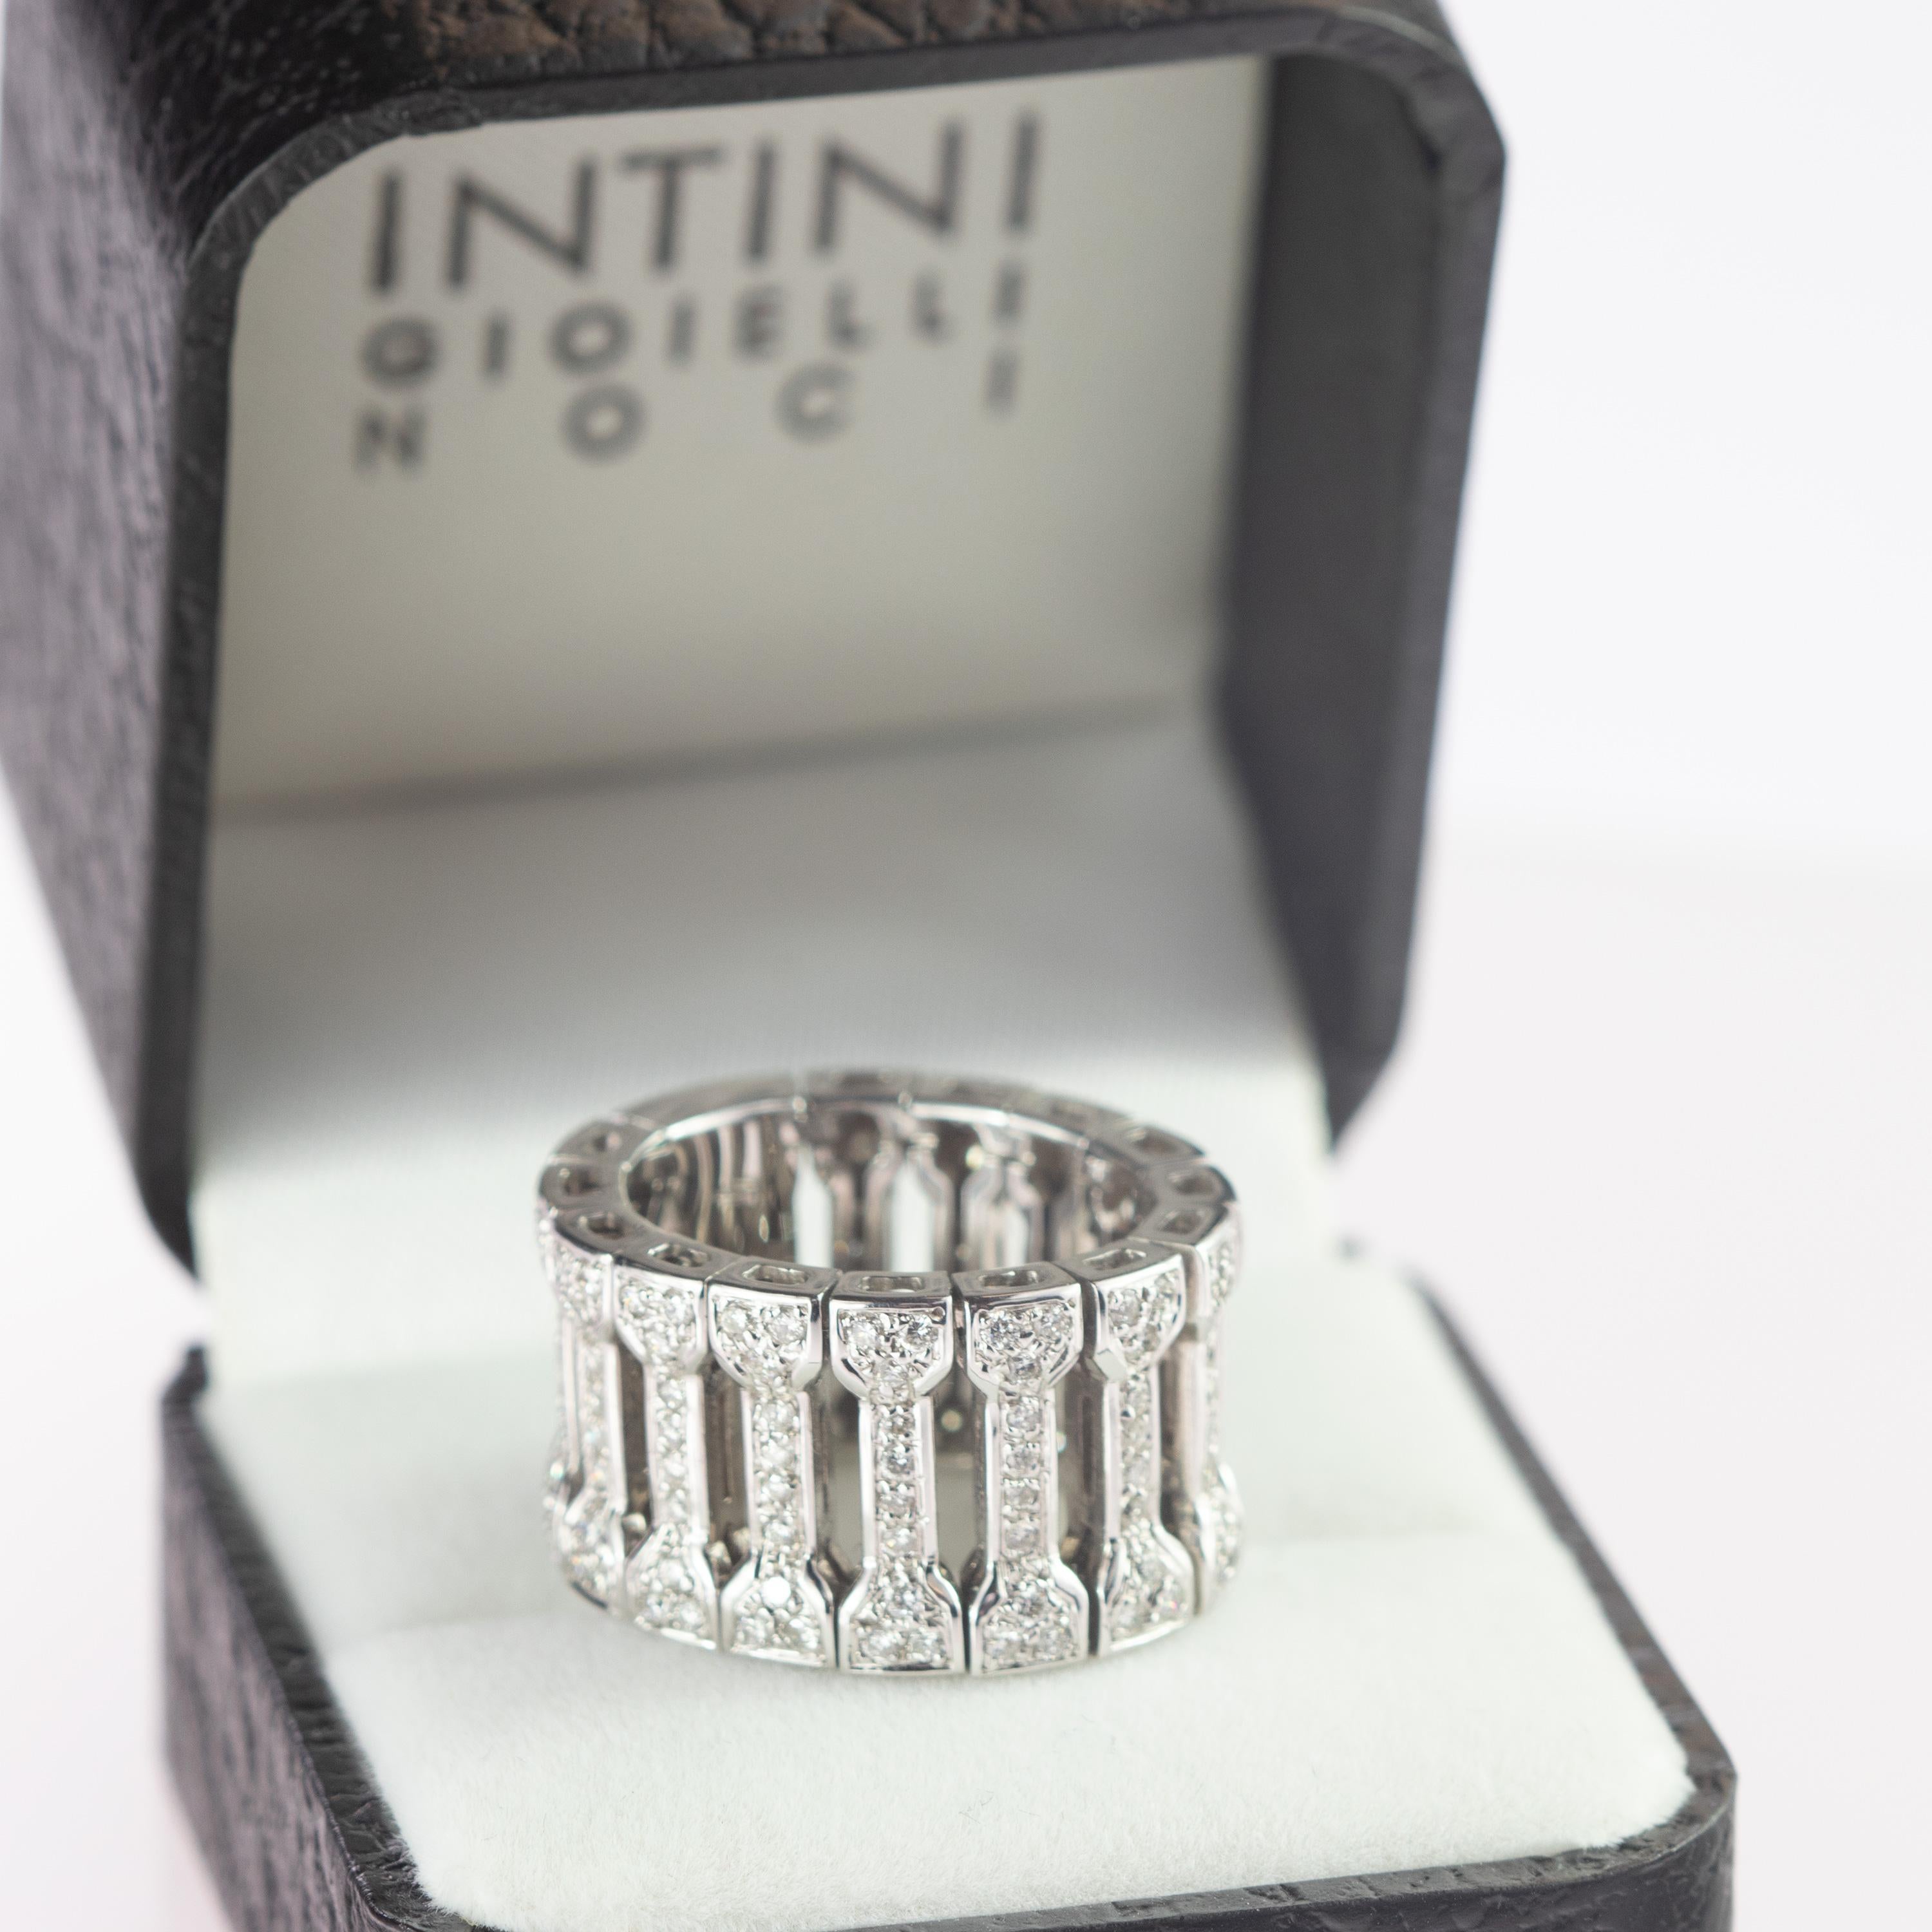 Rare and magnificent flexible band ring 1.30 carat diamond carats helded in a 18 karat white gold structure. The ring has an exquisite and modern design that holds 140 stunning diamonds in a brilliant shape.
 
At intini all our jewels have a